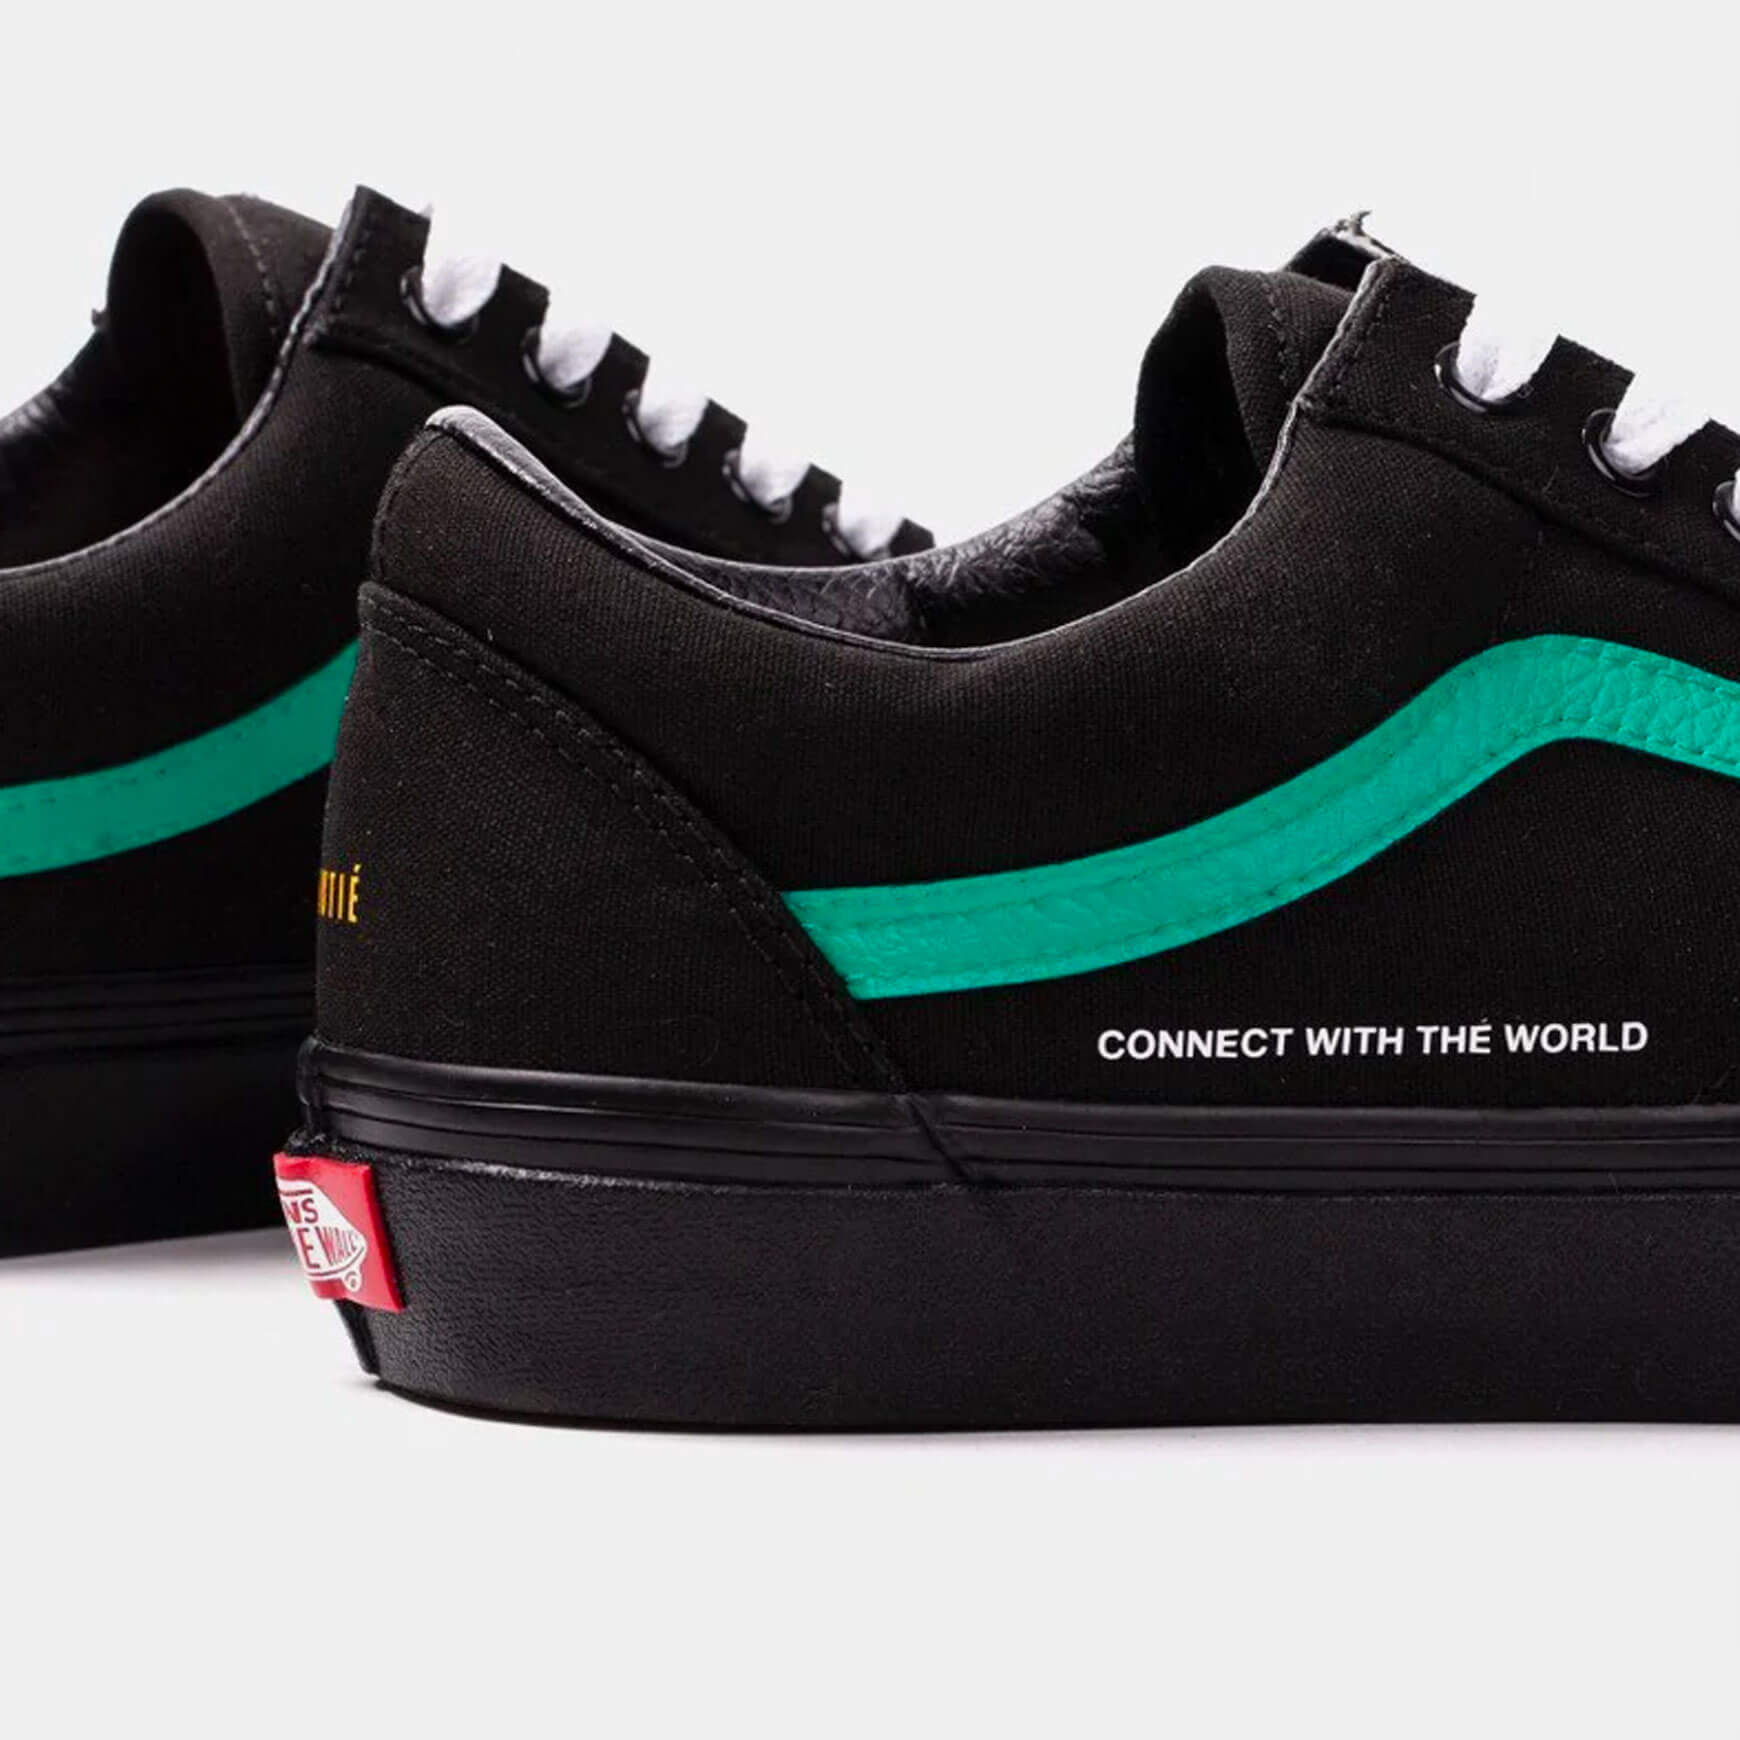 Vans Old Skool "Connect with the World" Custom